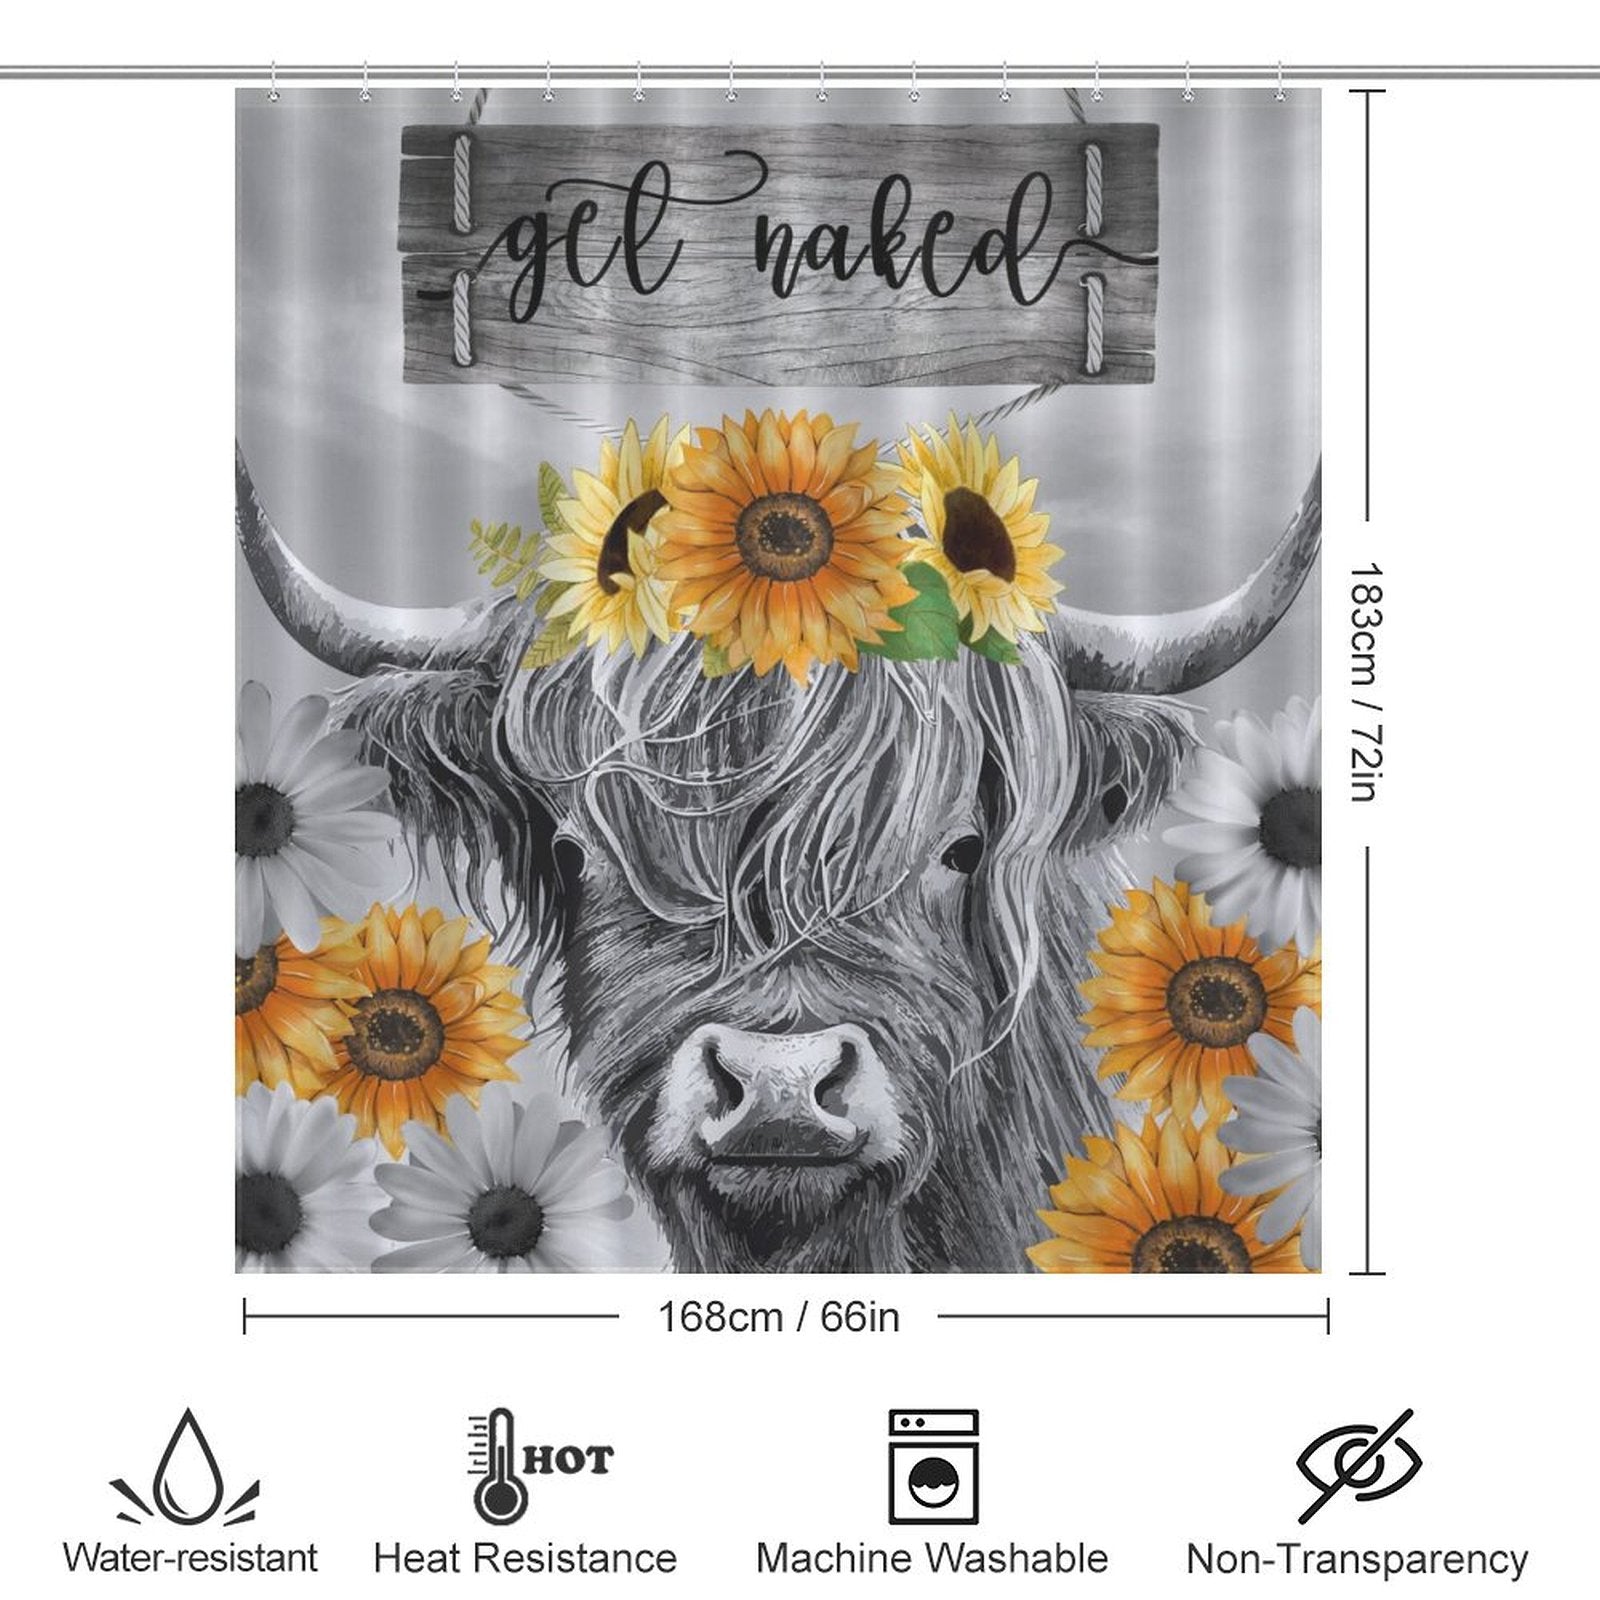 Introducing the Highland Cow Black and White Funny Letters Sunflower Get Naked Shower Curtain-Cottoncat adorned with a floral crown of sunflowers and daisies. A wooden sign above reads "Get Naked." Measuring 183cm by 168cm, this Cotton Cat shower curtain is both charming and functional, with symbols denoting its features.